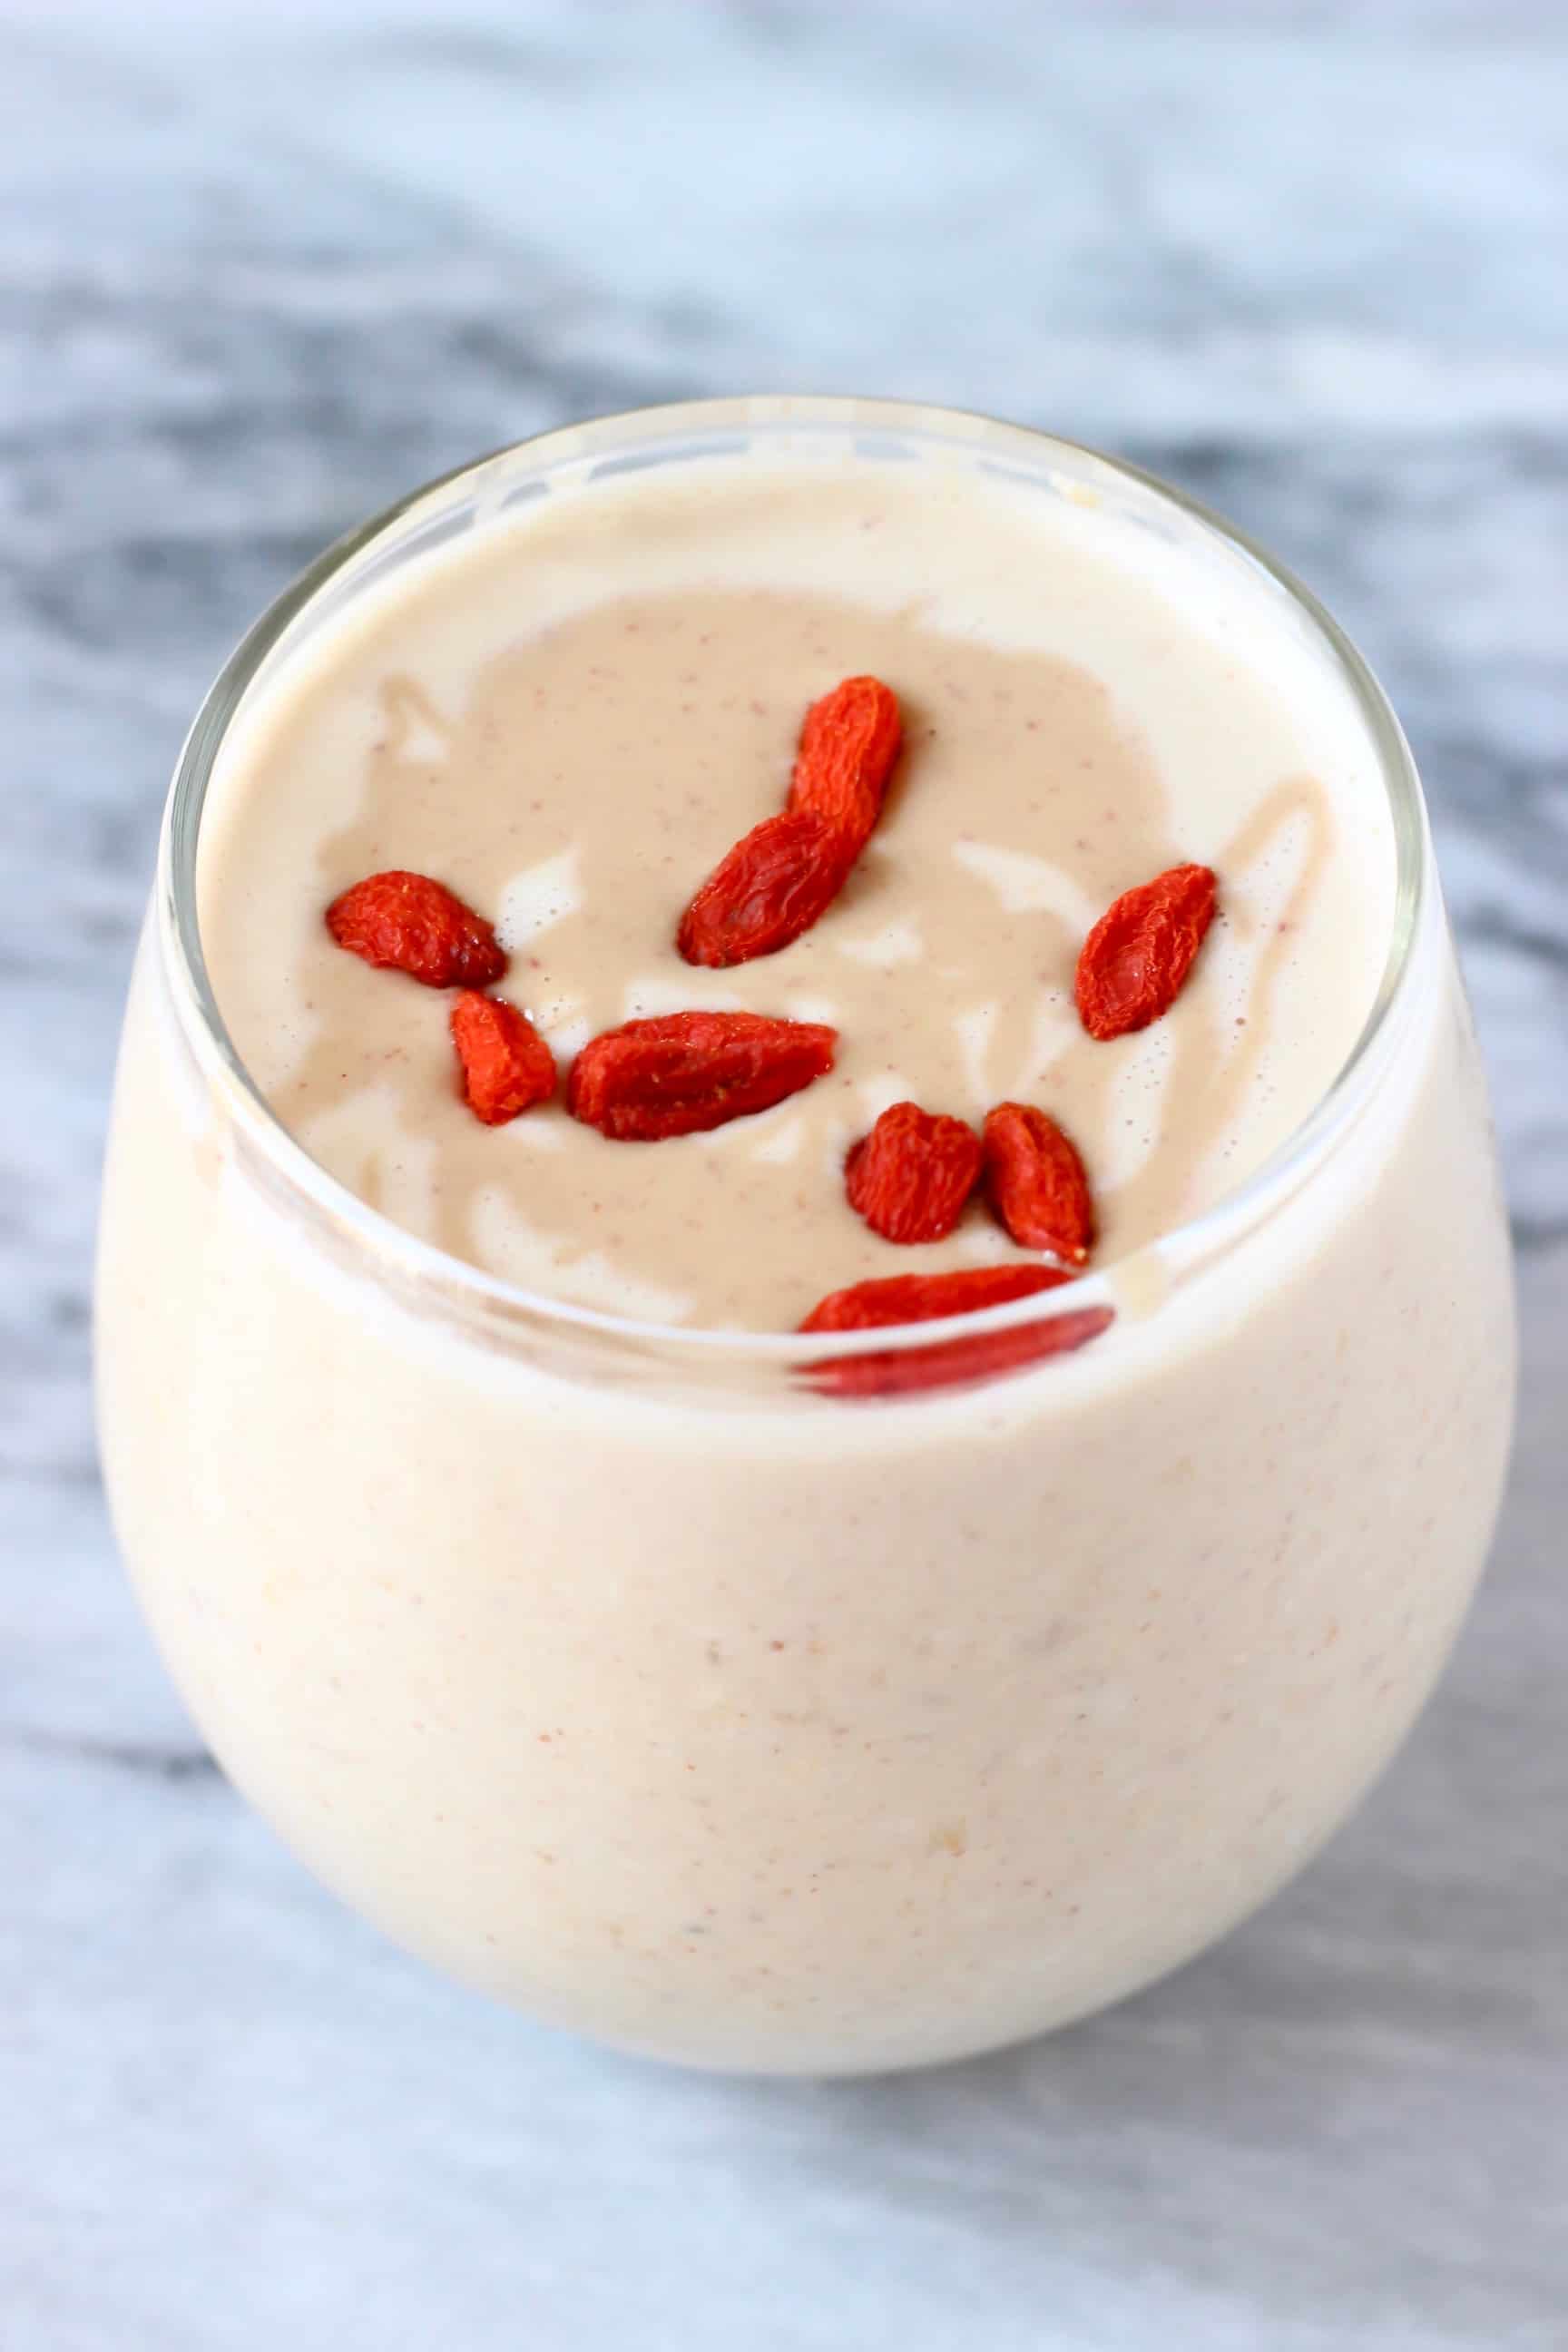 Peanut butter overnight oats topped with red goji berries in a small glass against a marble background